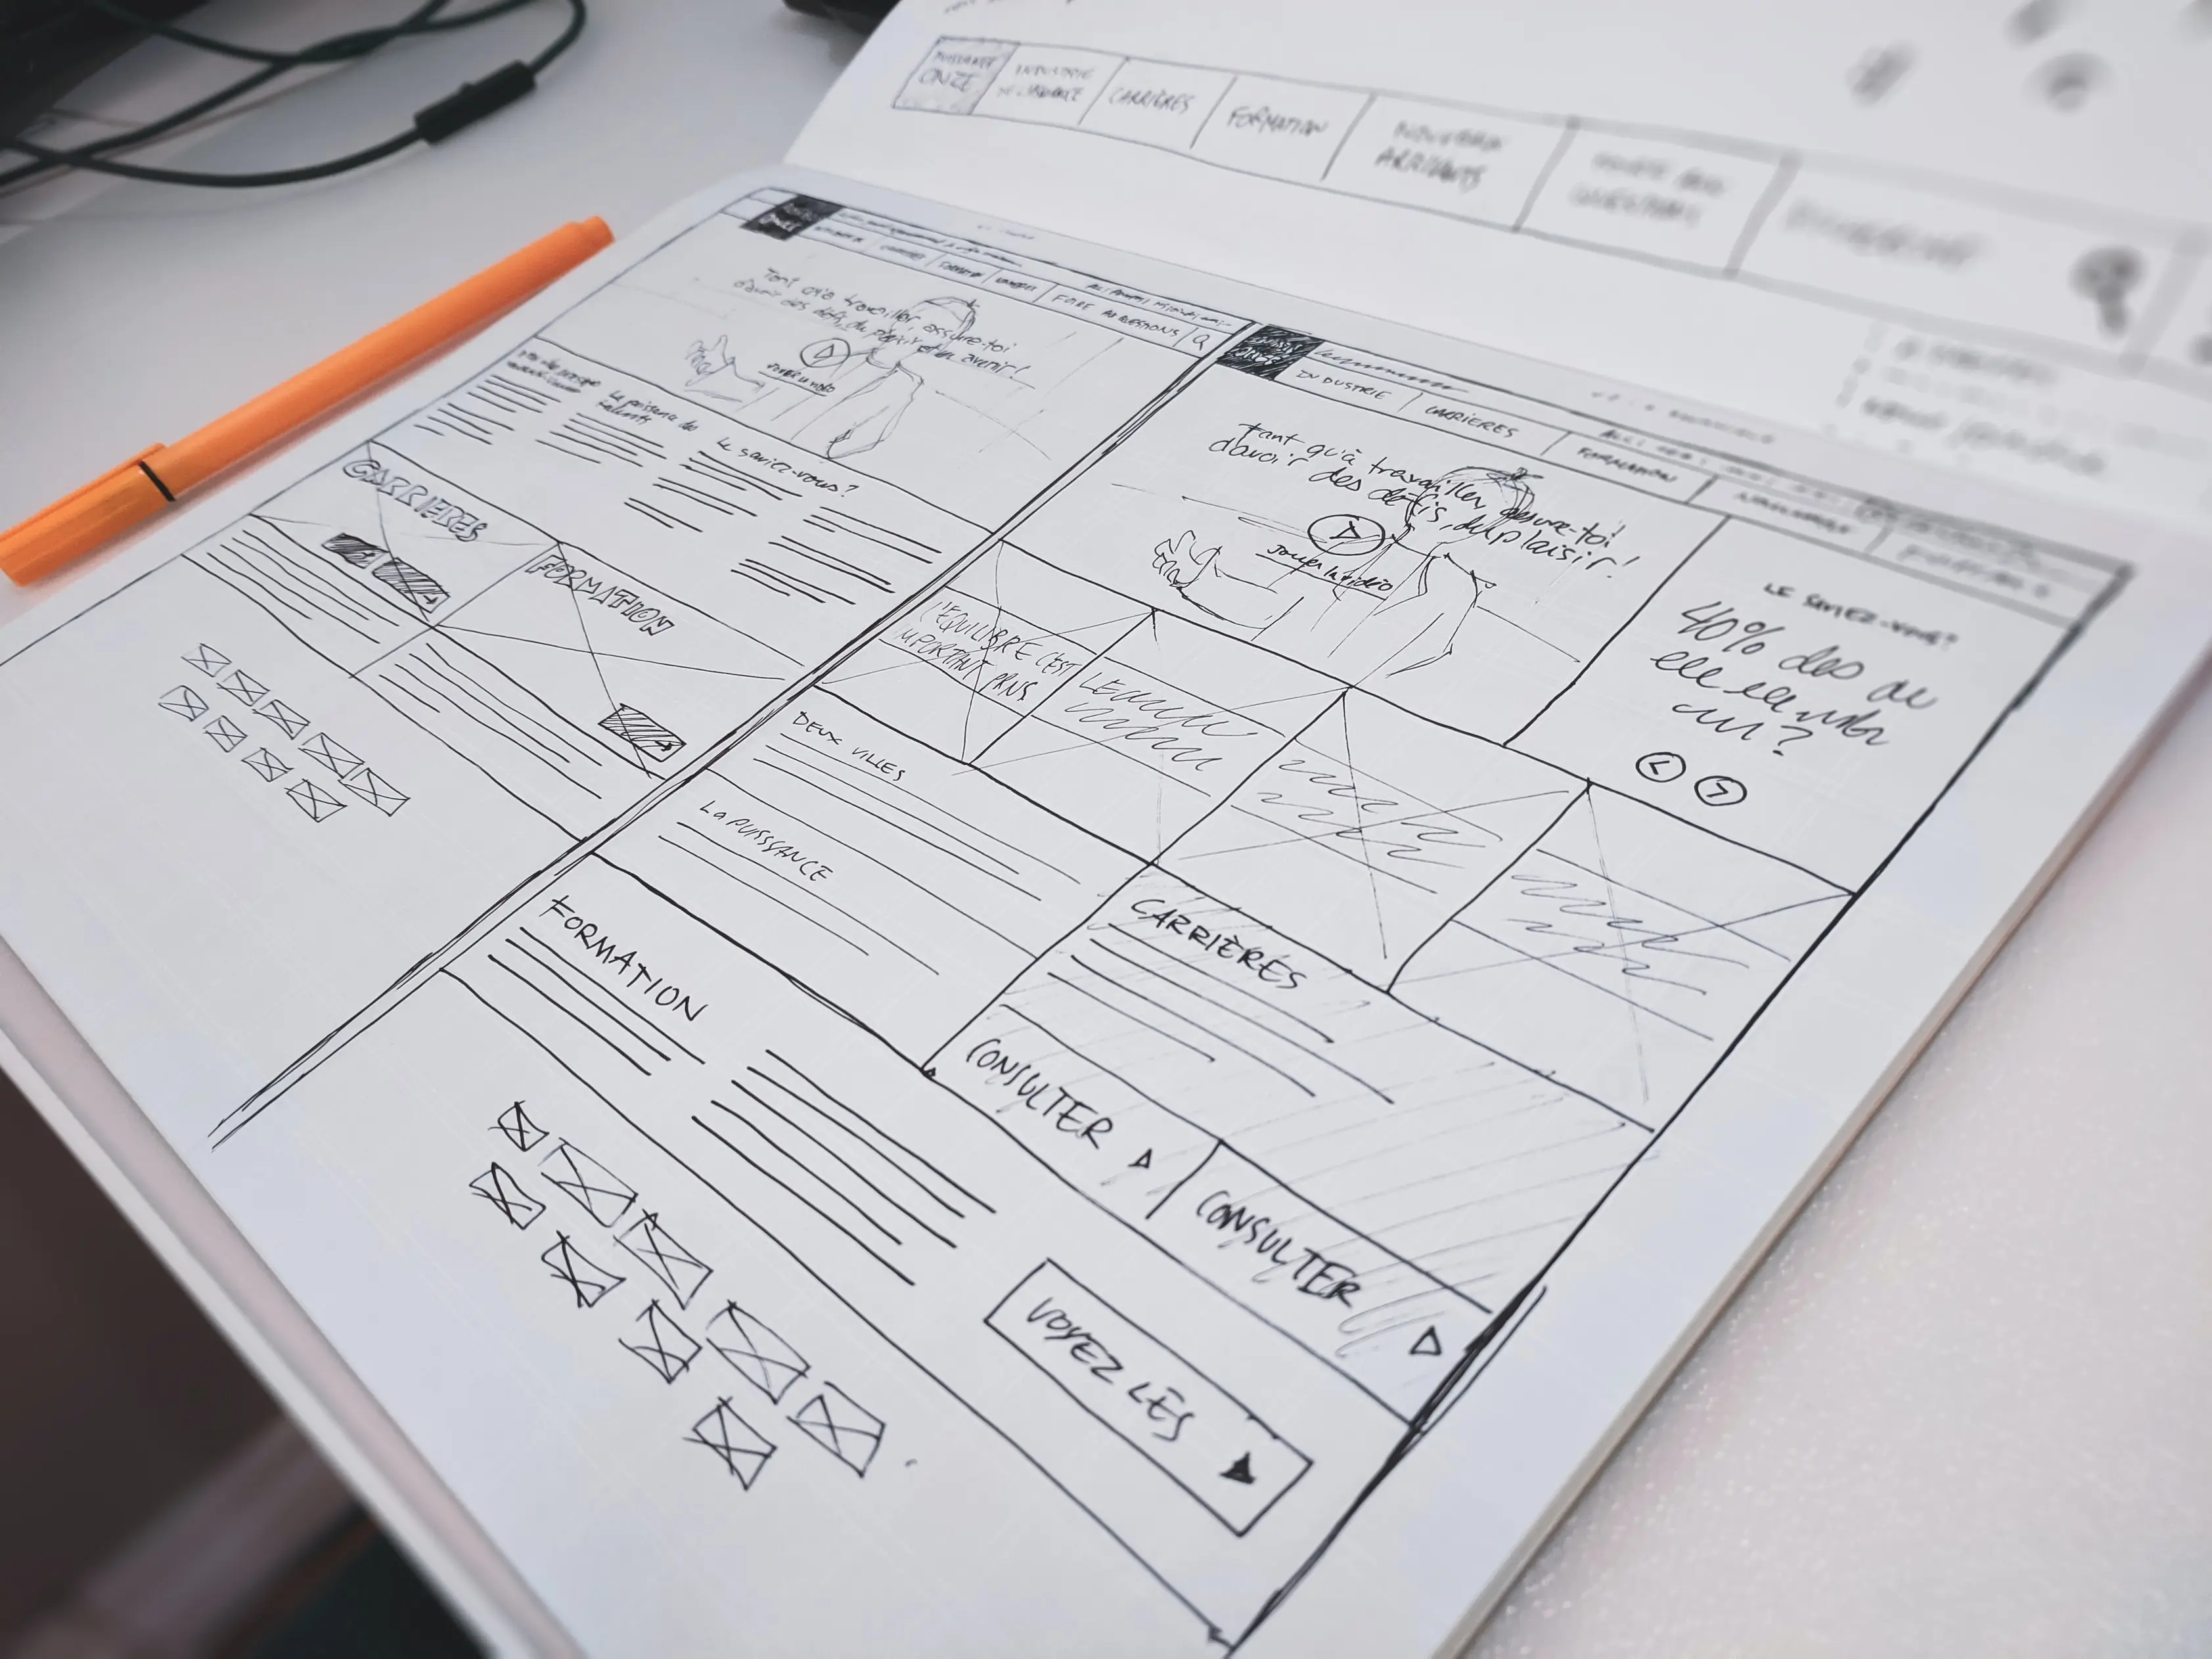 Image showing a product wireframe in a notebook